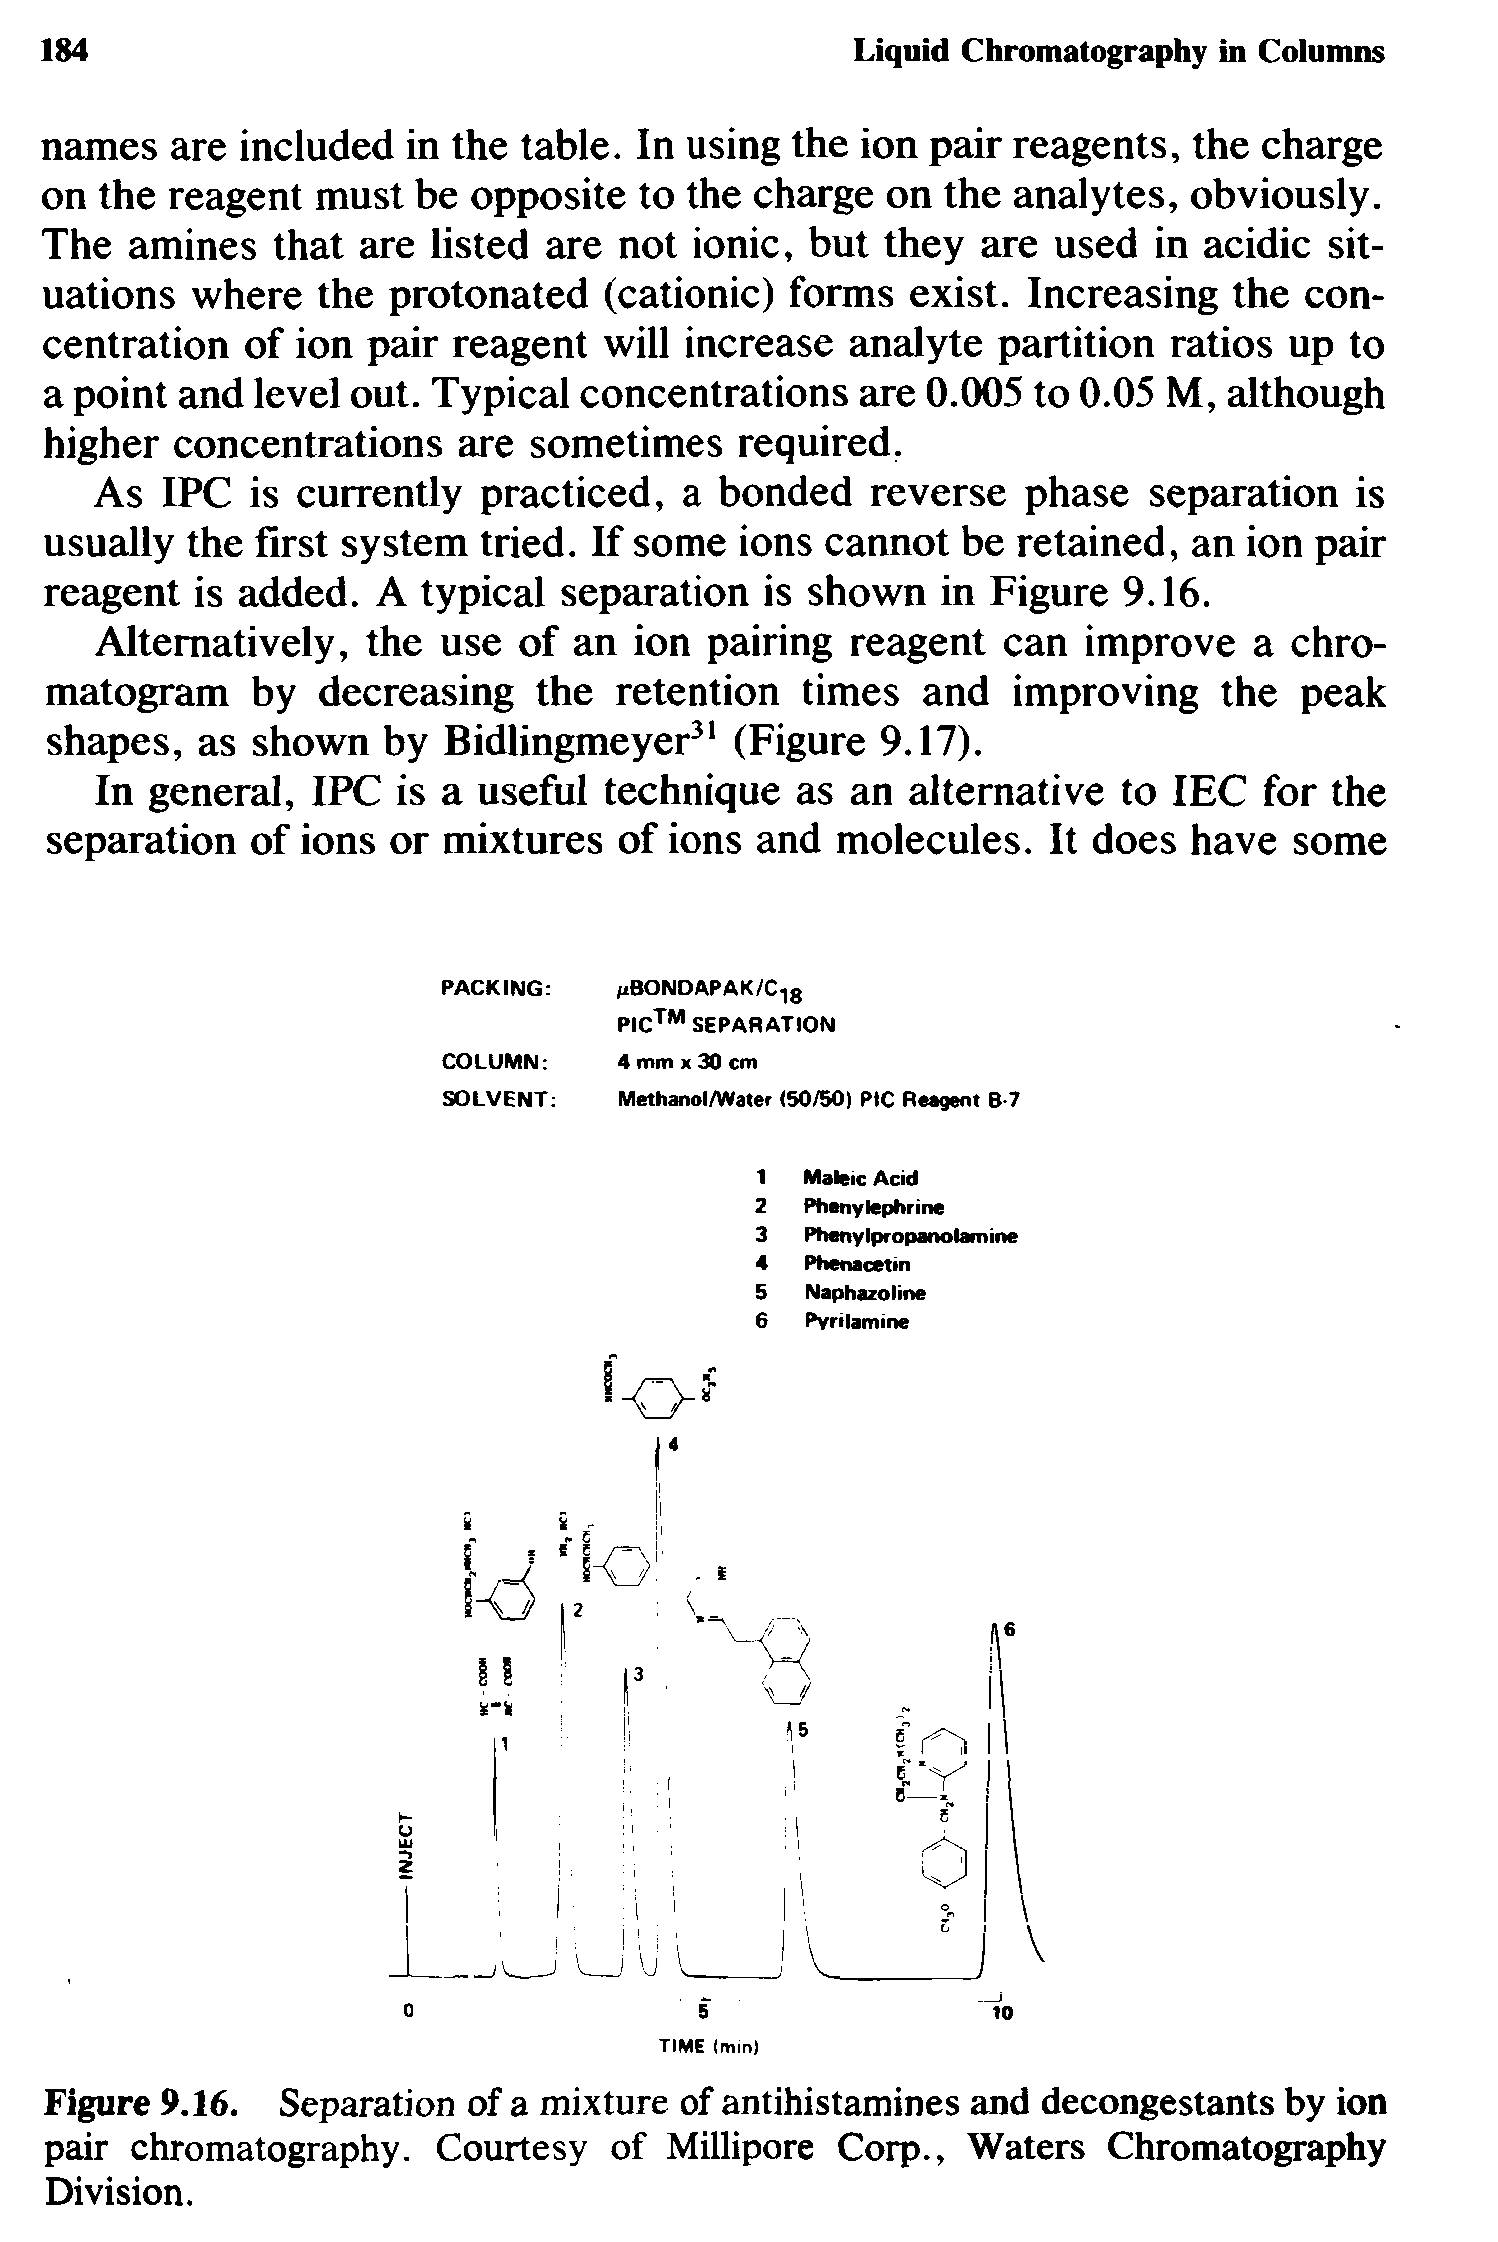 Figure 9.16. Separation of a mixture of antihistamines and decongestants by ion pair chromatography. Courtesy of Millipore Corp., Waters Chromatography Division.